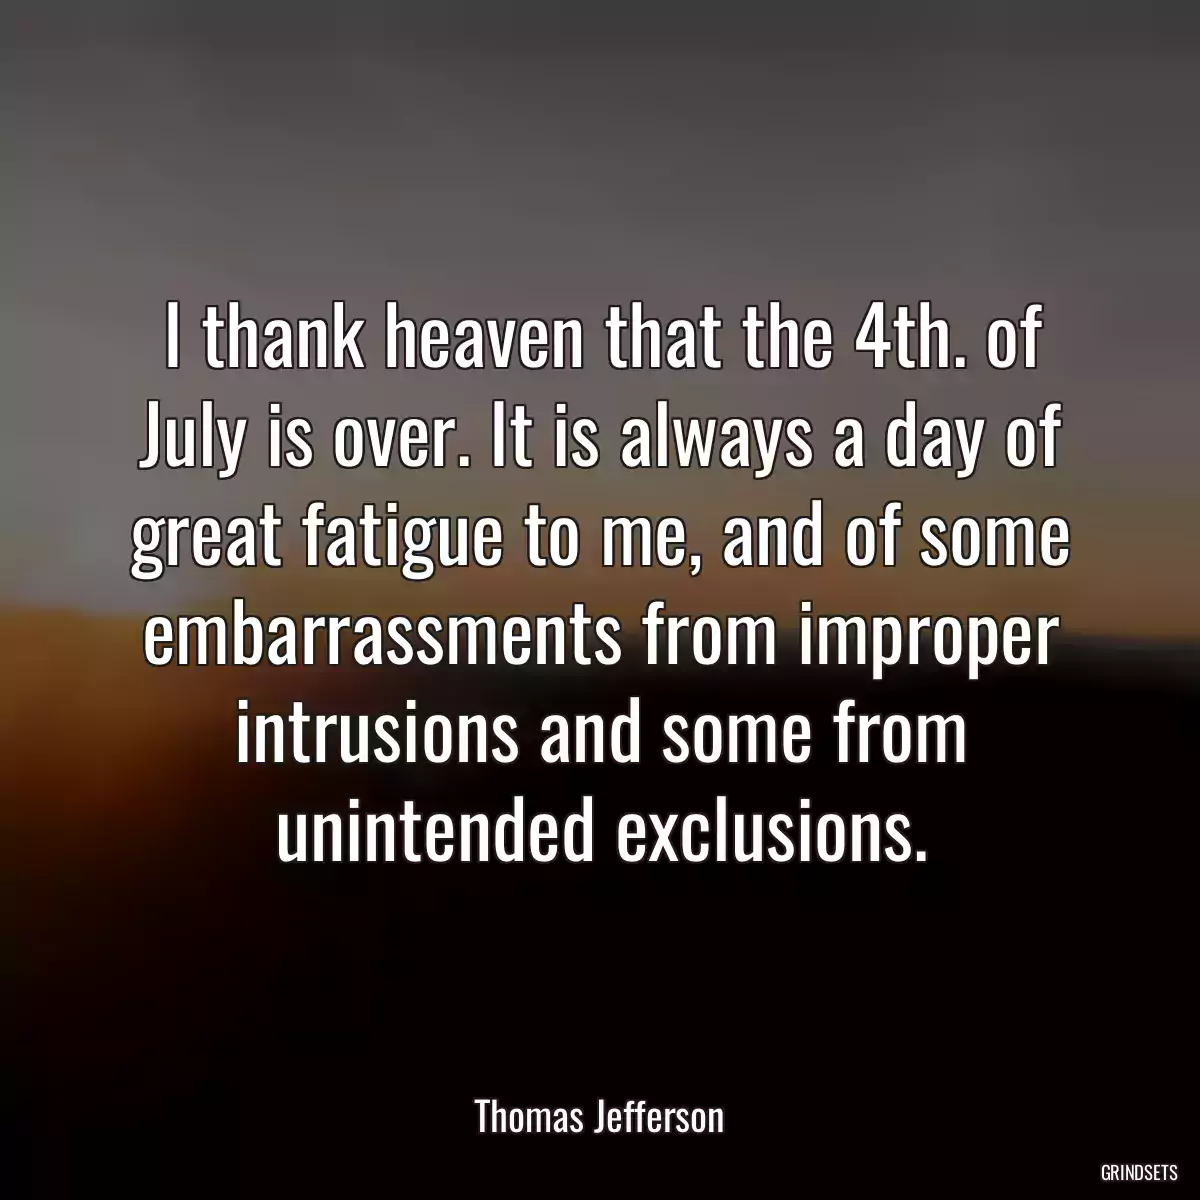 I thank heaven that the 4th. of July is over. It is always a day of great fatigue to me, and of some embarrassments from improper intrusions and some from unintended exclusions.